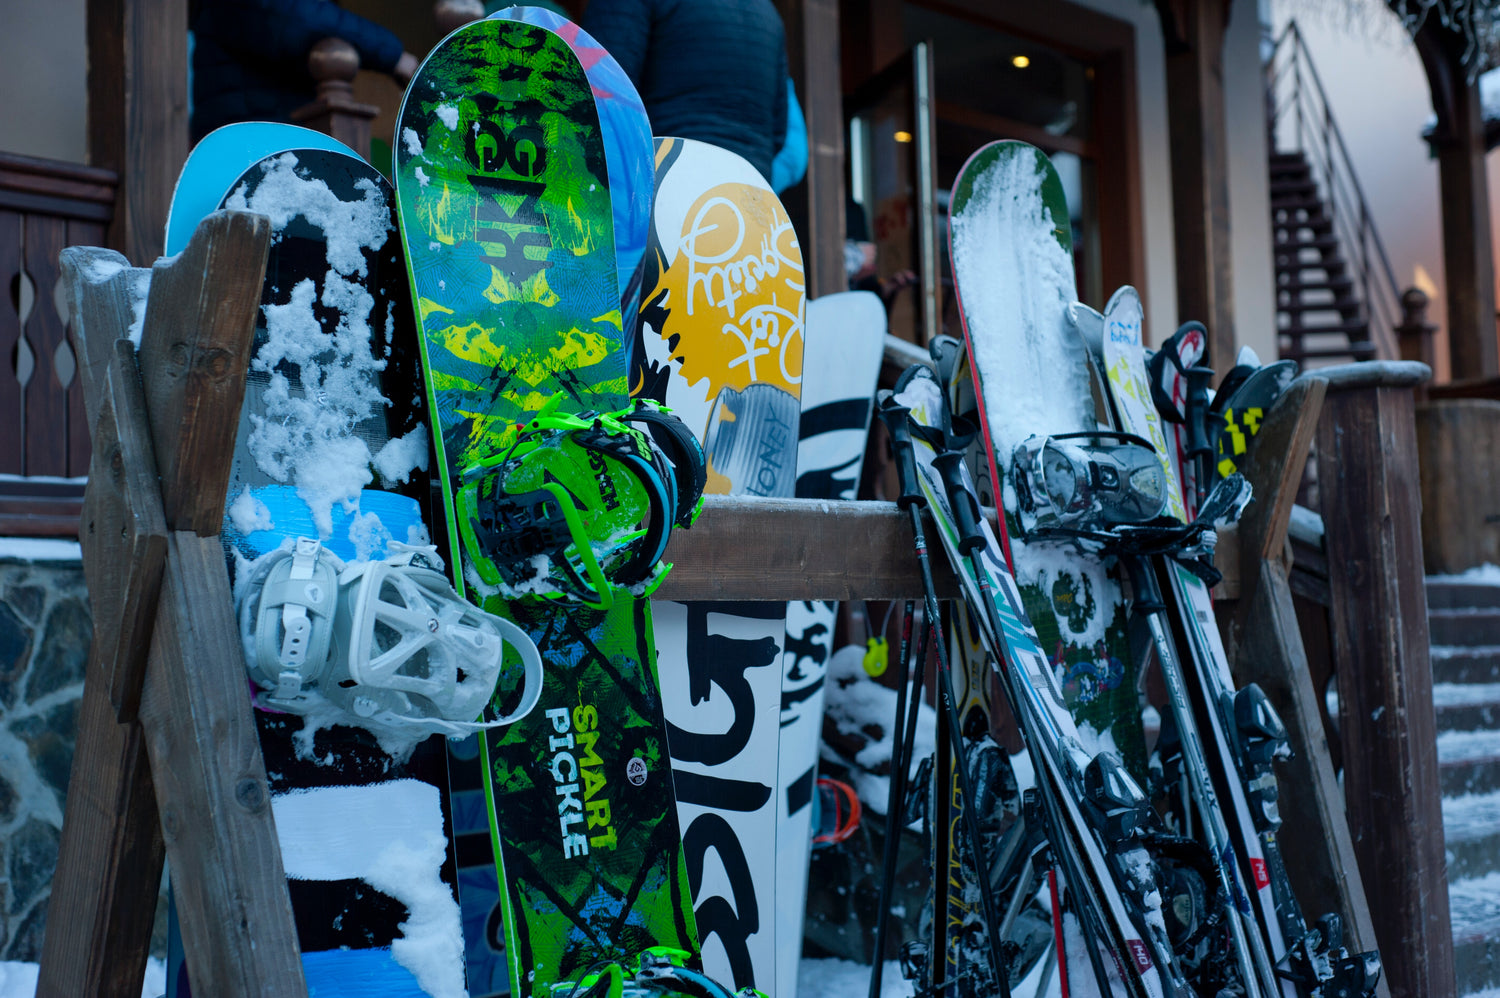 The Best Way to Ship Your Skis, Snowboard & Equipment